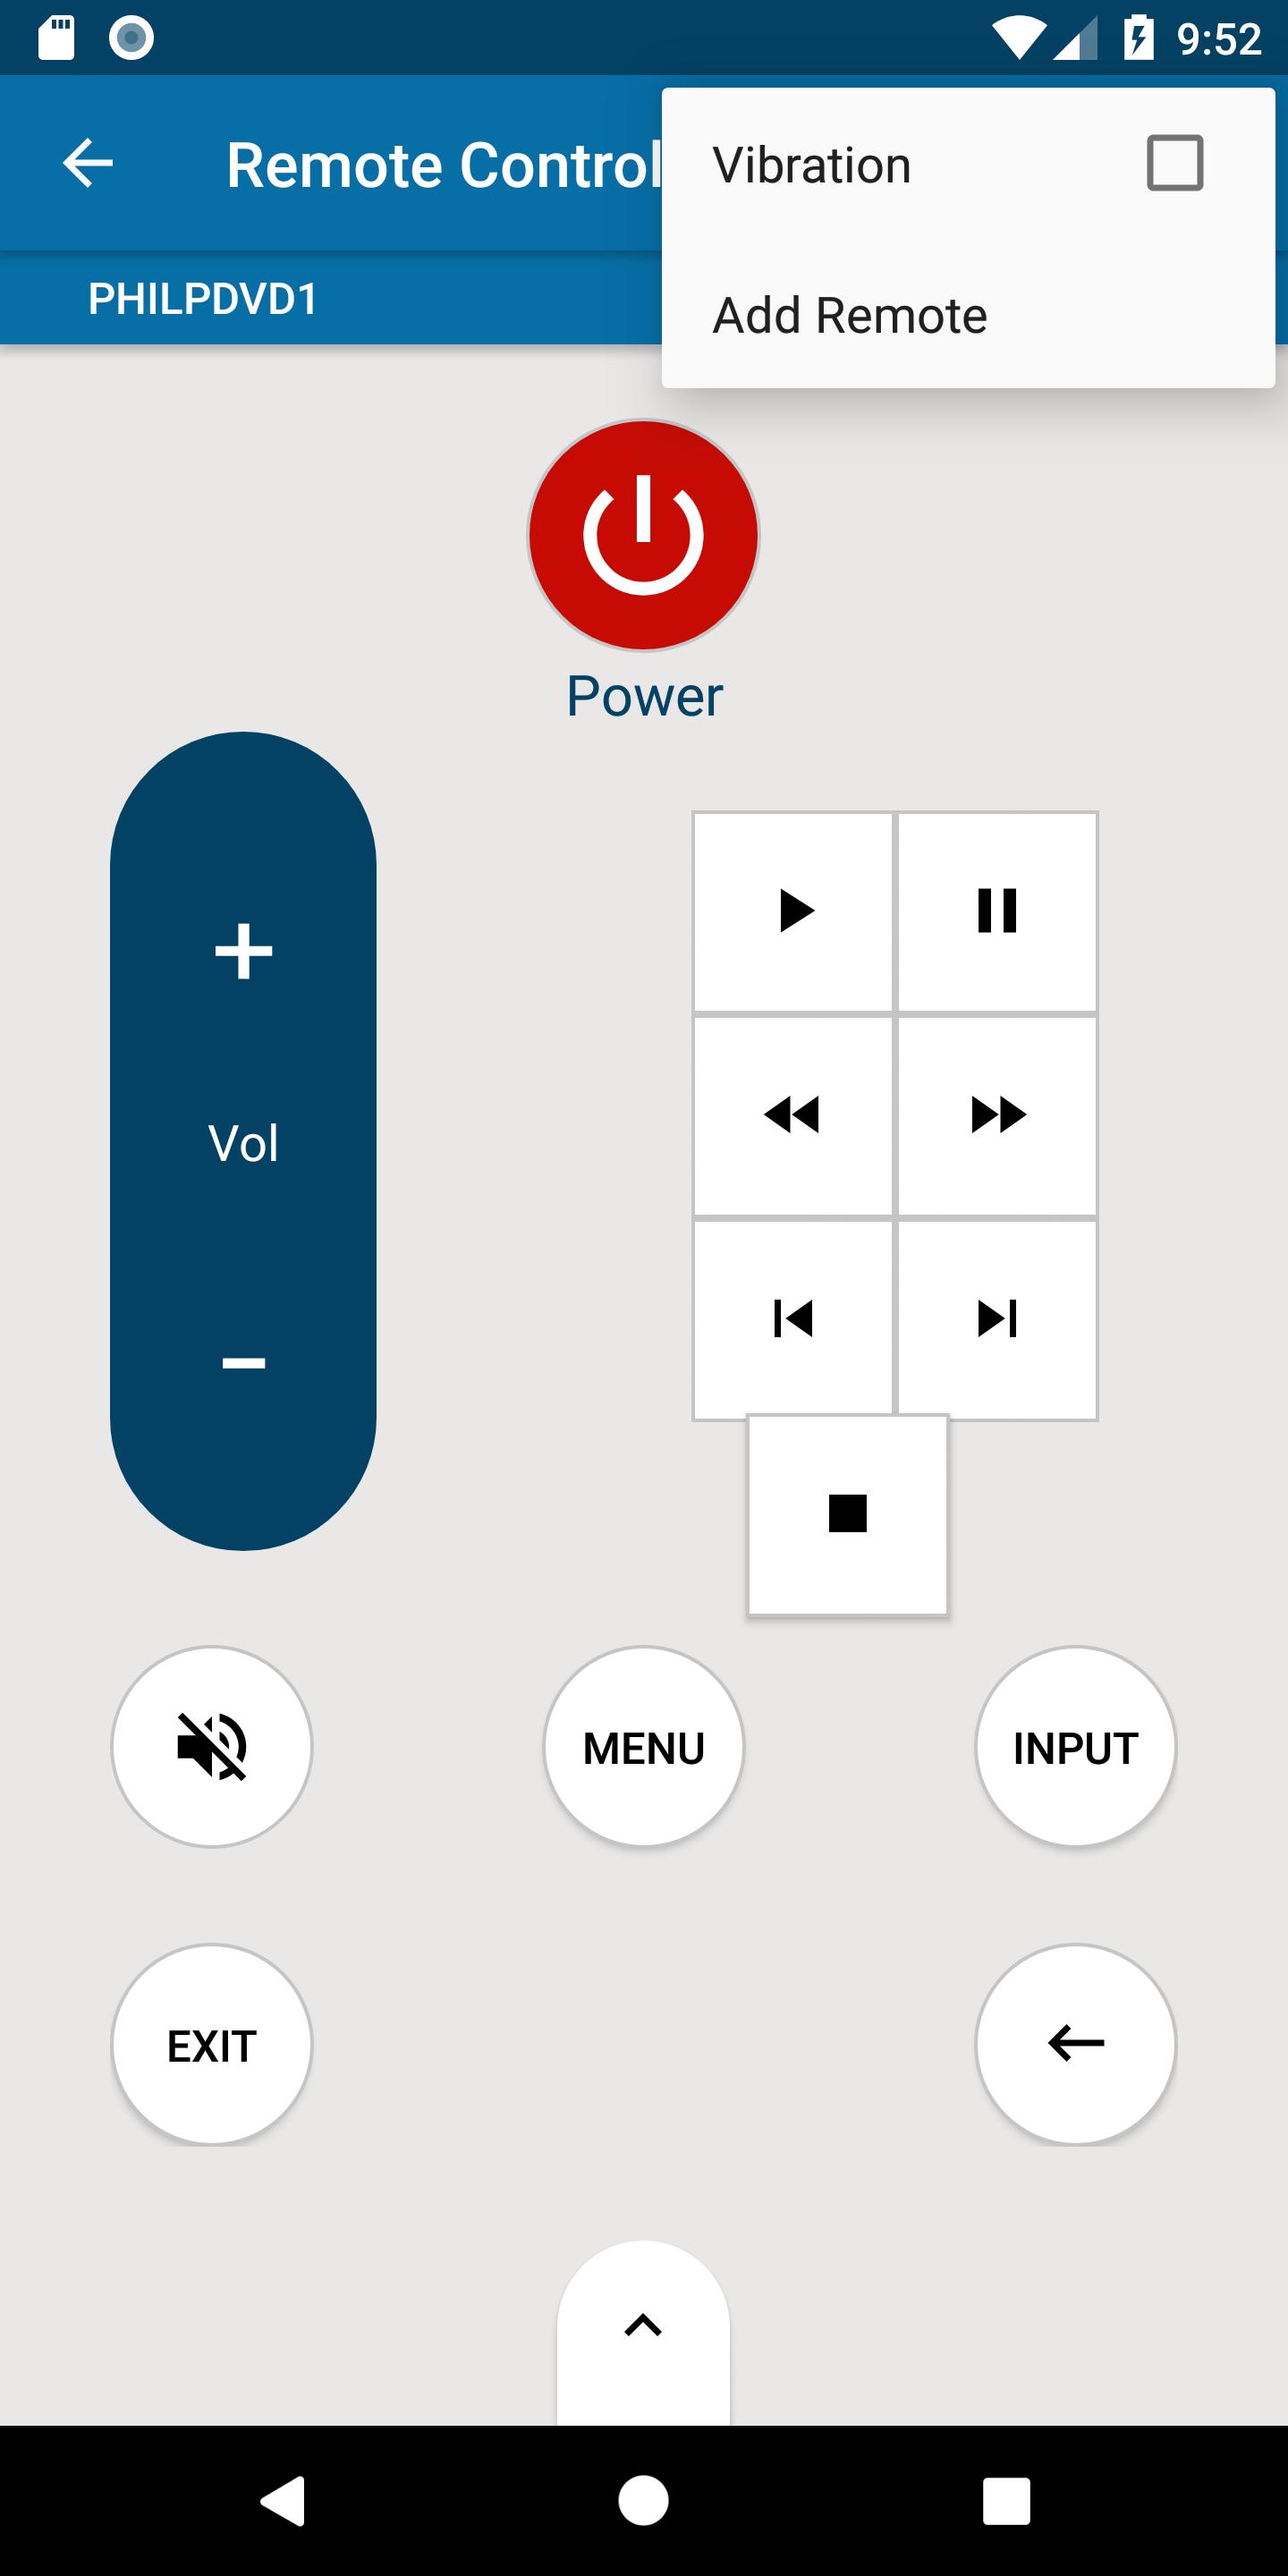 Philips DVD Remote for Android - APK Download